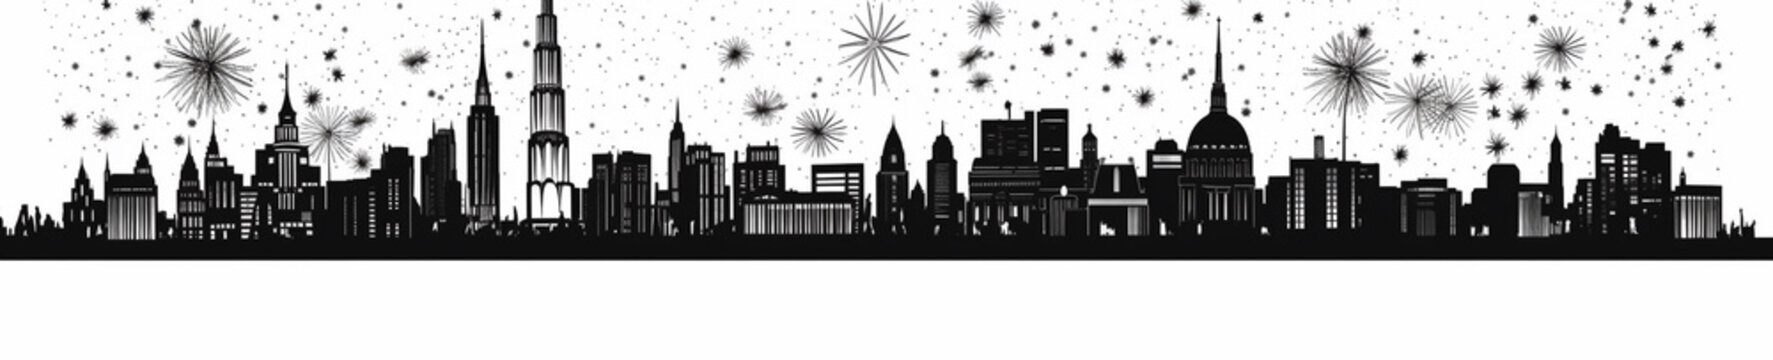 Black and white, city New Year Eve Celebrations in a horizontal row, Christmas Holiday, Winter illustration, vector illustration flat style background, banner, wallpaper, space for text